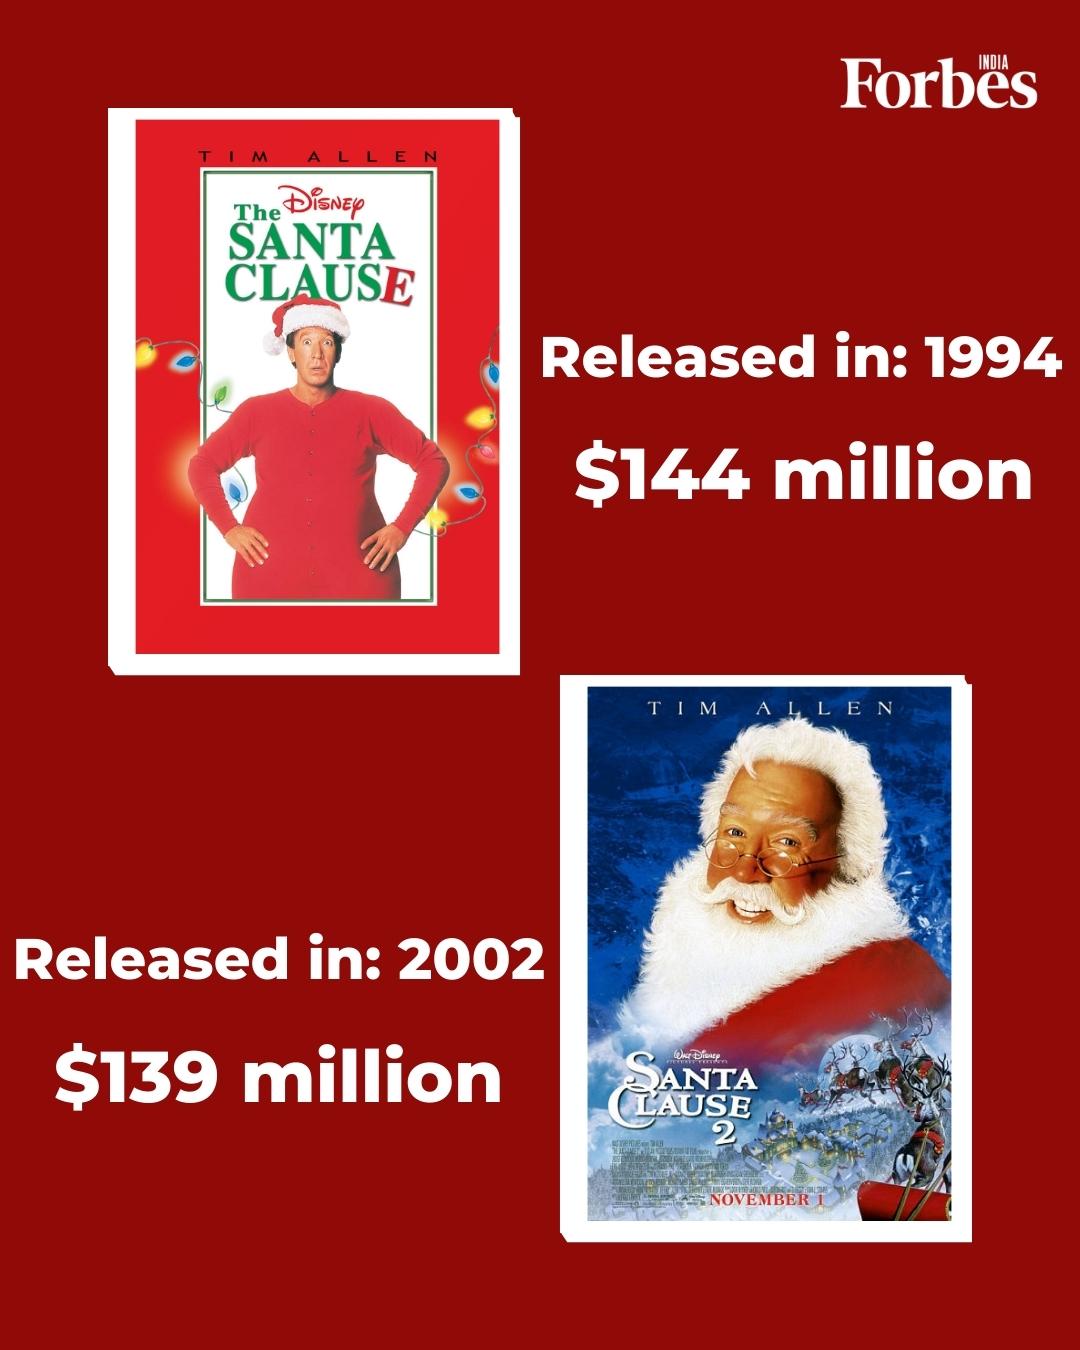 Ready for a Christmas movie-marathon? Here are the top grossing films